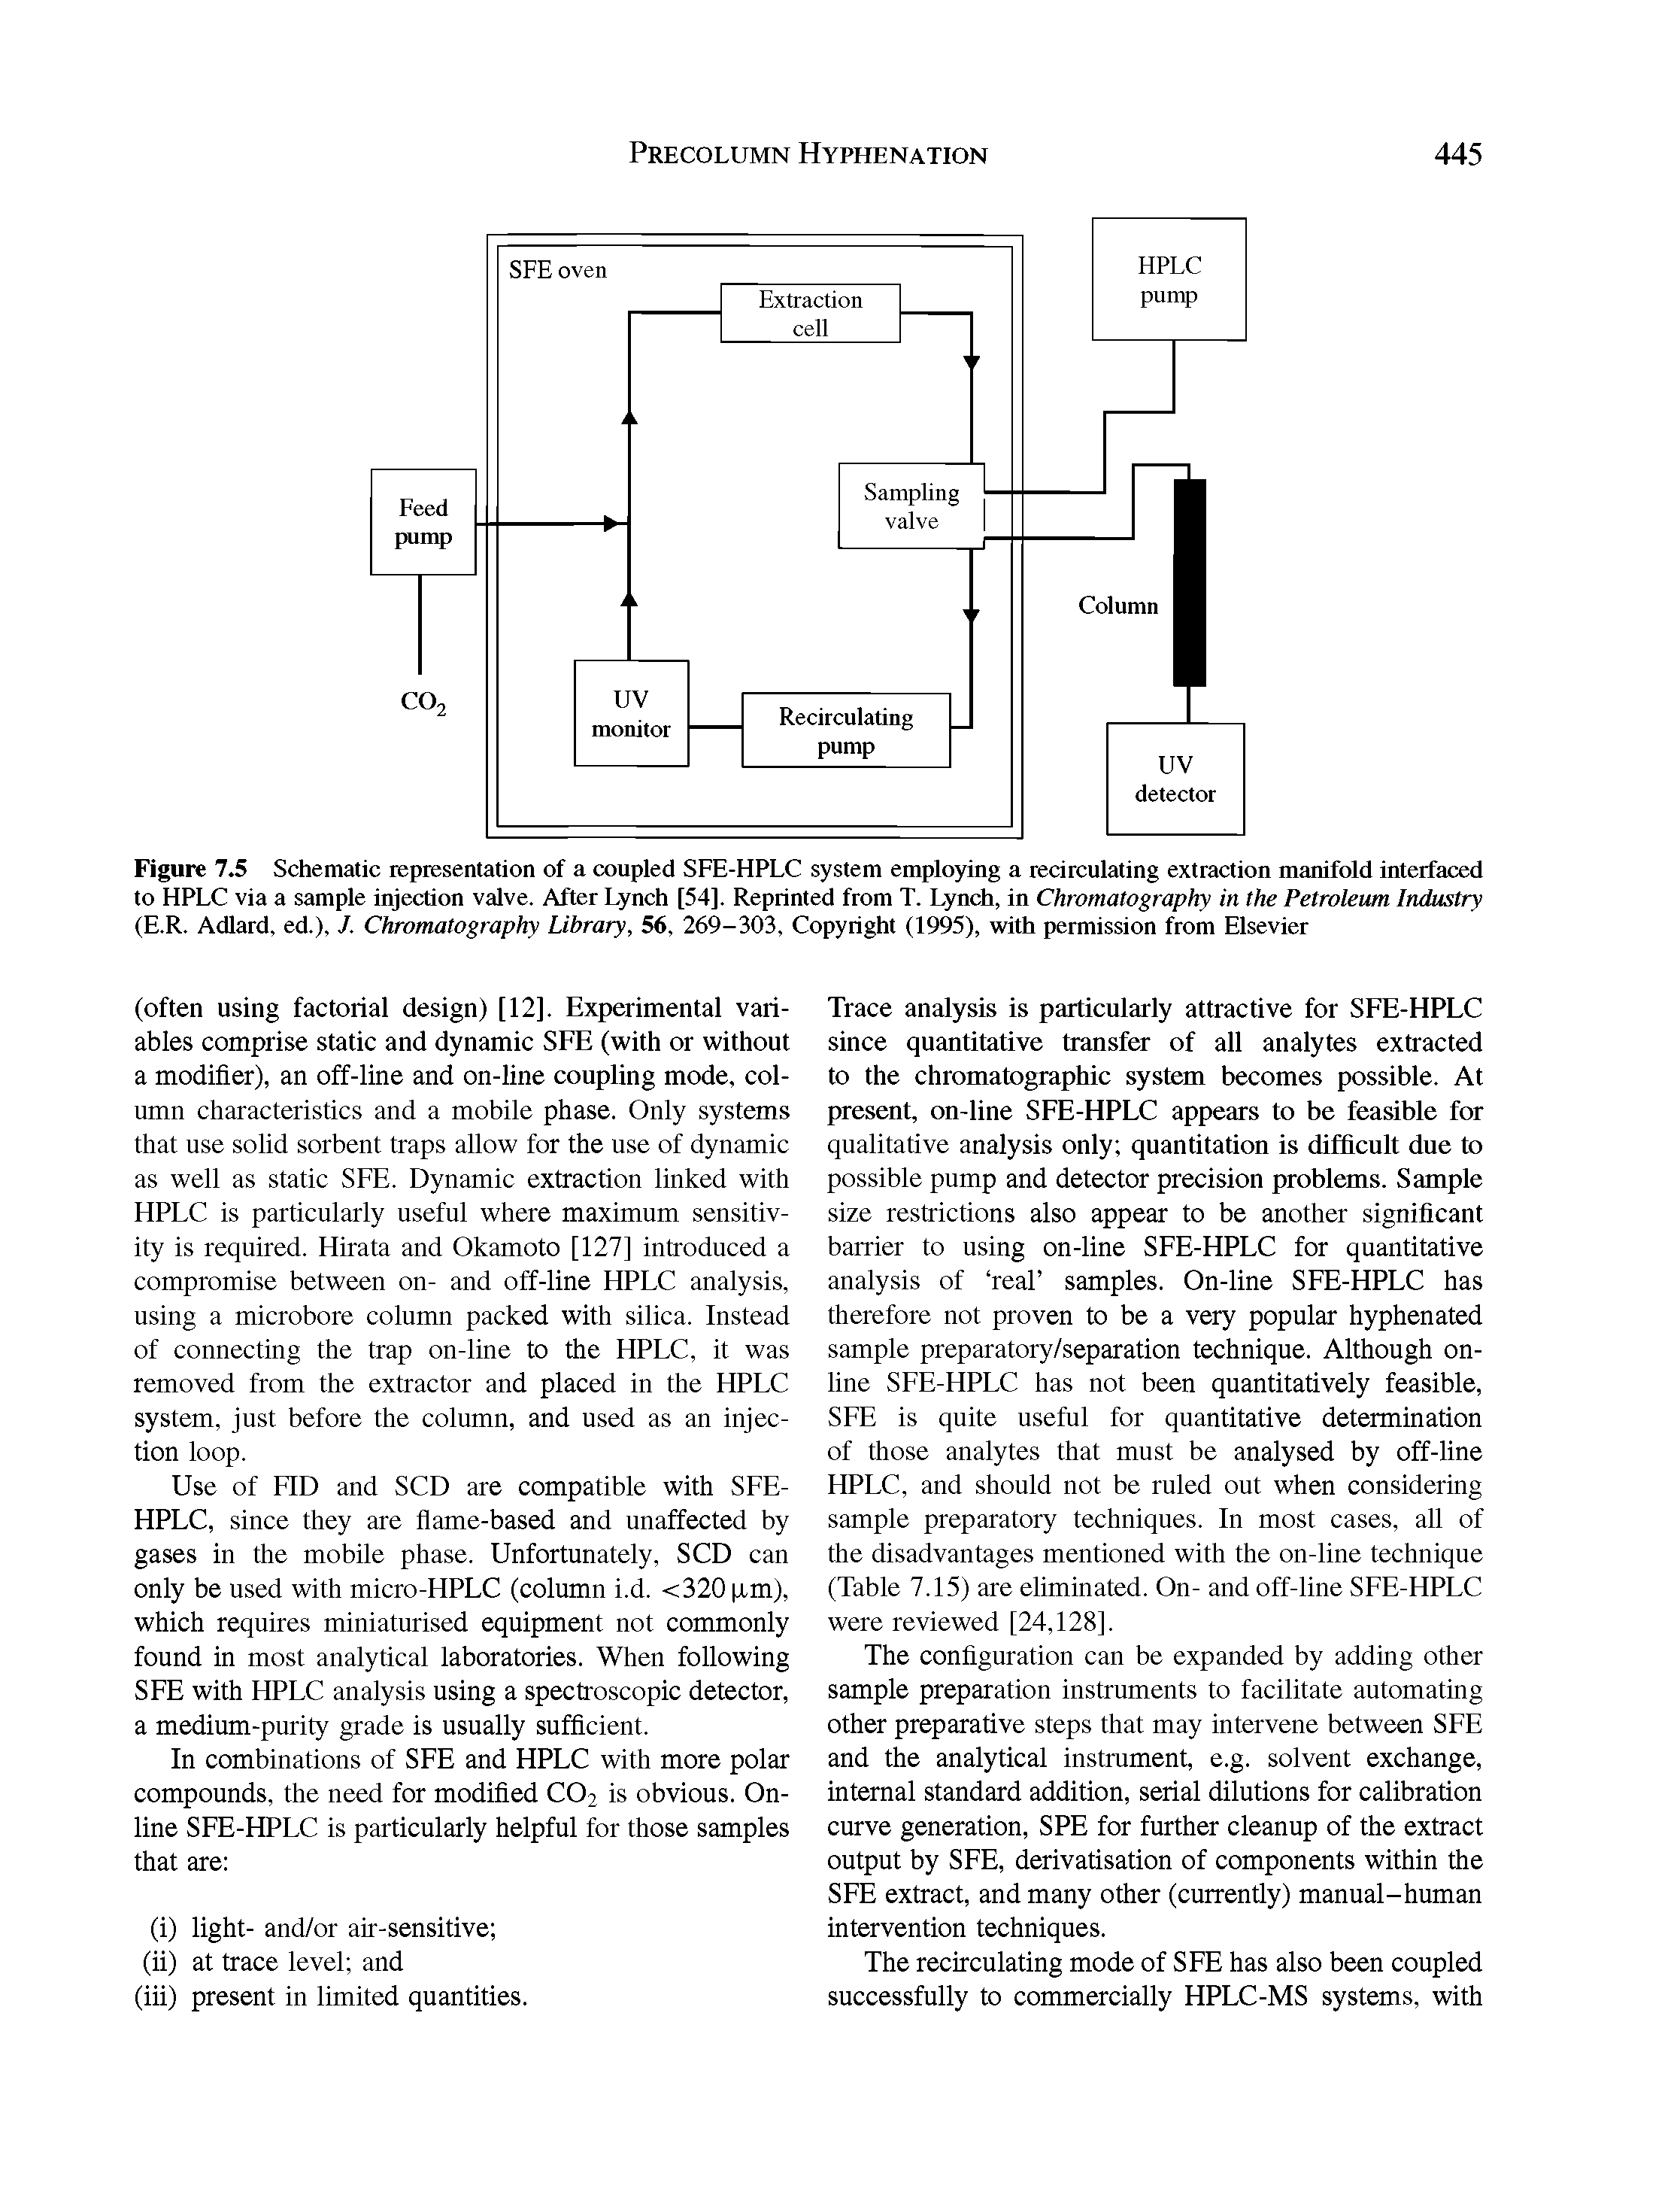 Figure 7.5 Schematic representation of a coupled SFE-HPLC system employing a recirculating extraction manifold interfaced to HPLC via a sample injection valve. After Lynch [54]. Reprinted from T. Lynch, in Chromatography in the Petroleum Industry (E.R. Adlard, ed.), J. Chromatography Library, 56, 269-303, Copyright (1995), with permission from Elsevier...